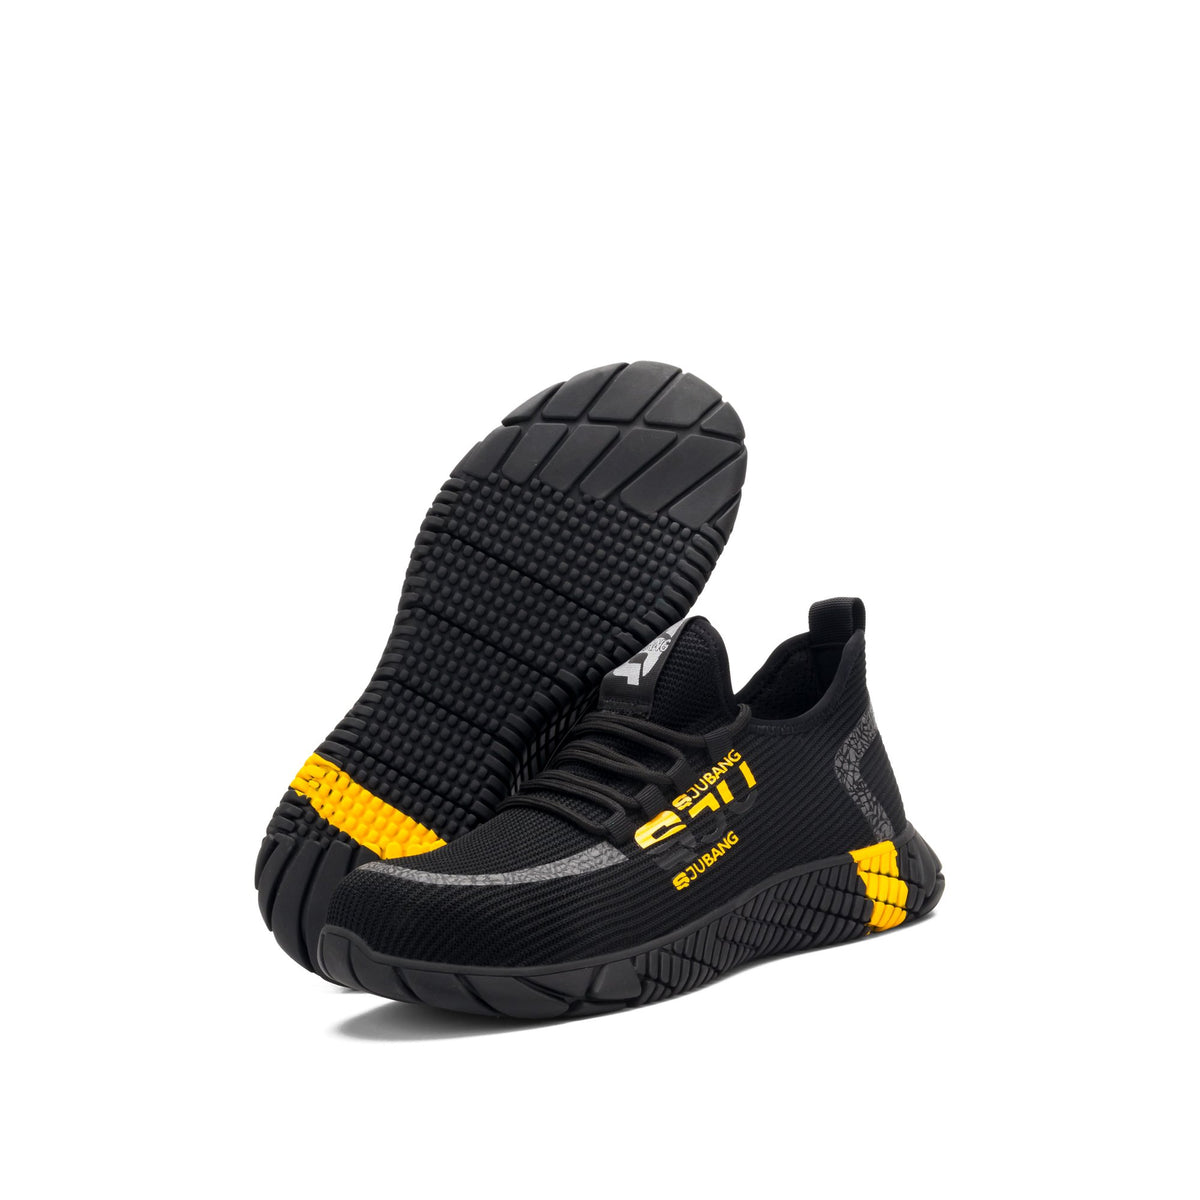 S Series Black Yellow - Indestructible Shoes